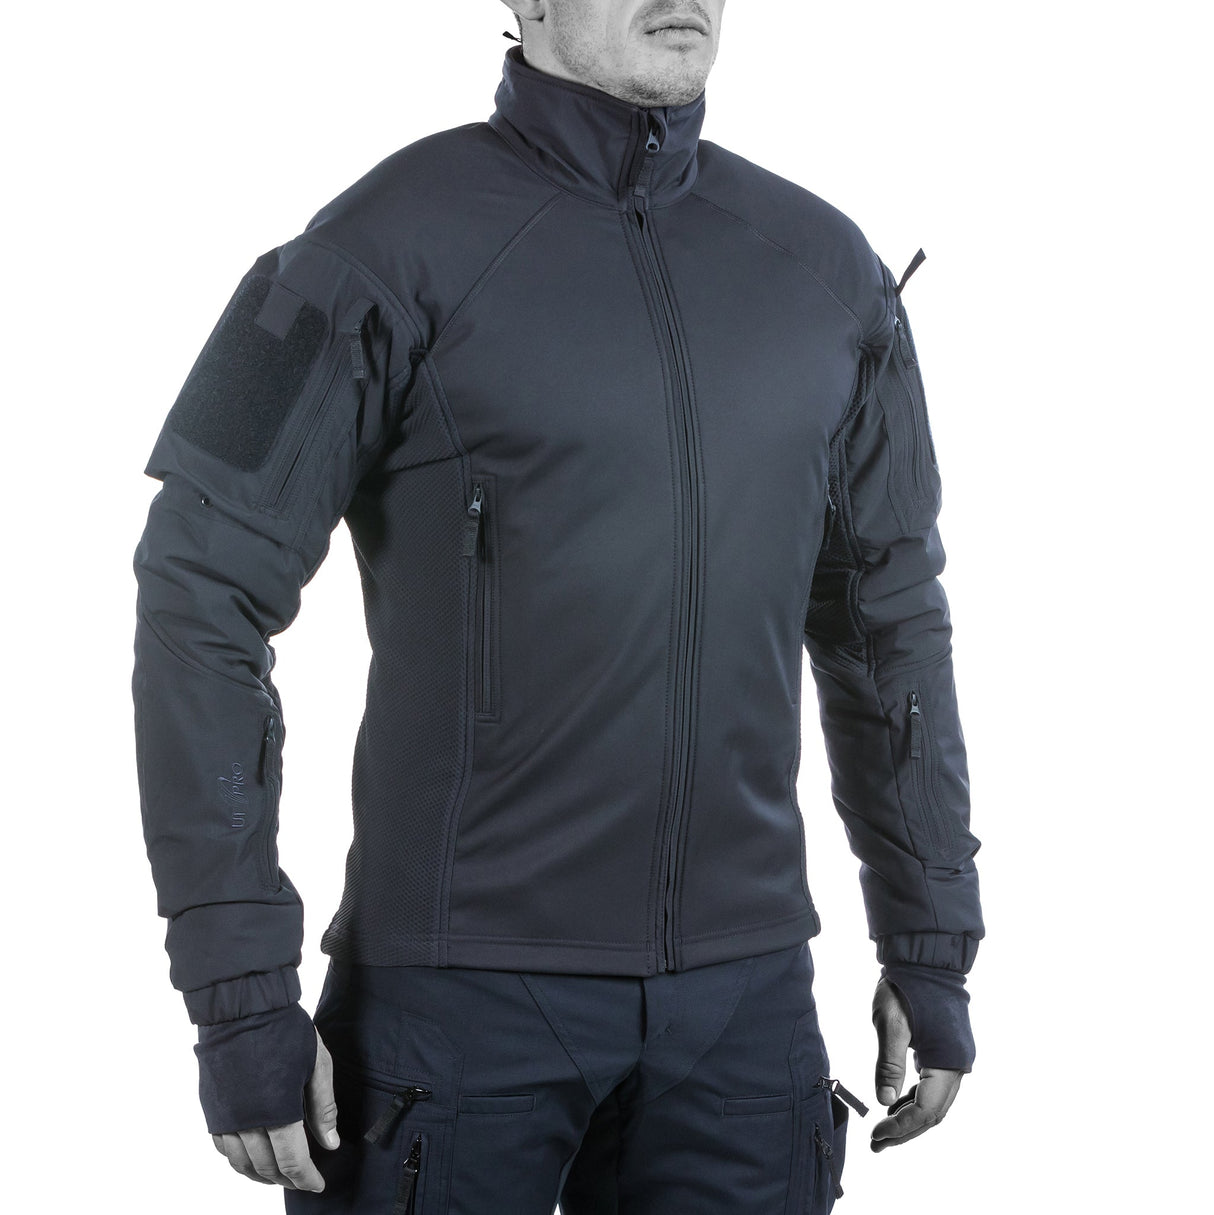 Tactical Cold Weather Gear: Windproof, water-repellent, thermal insulation lining.